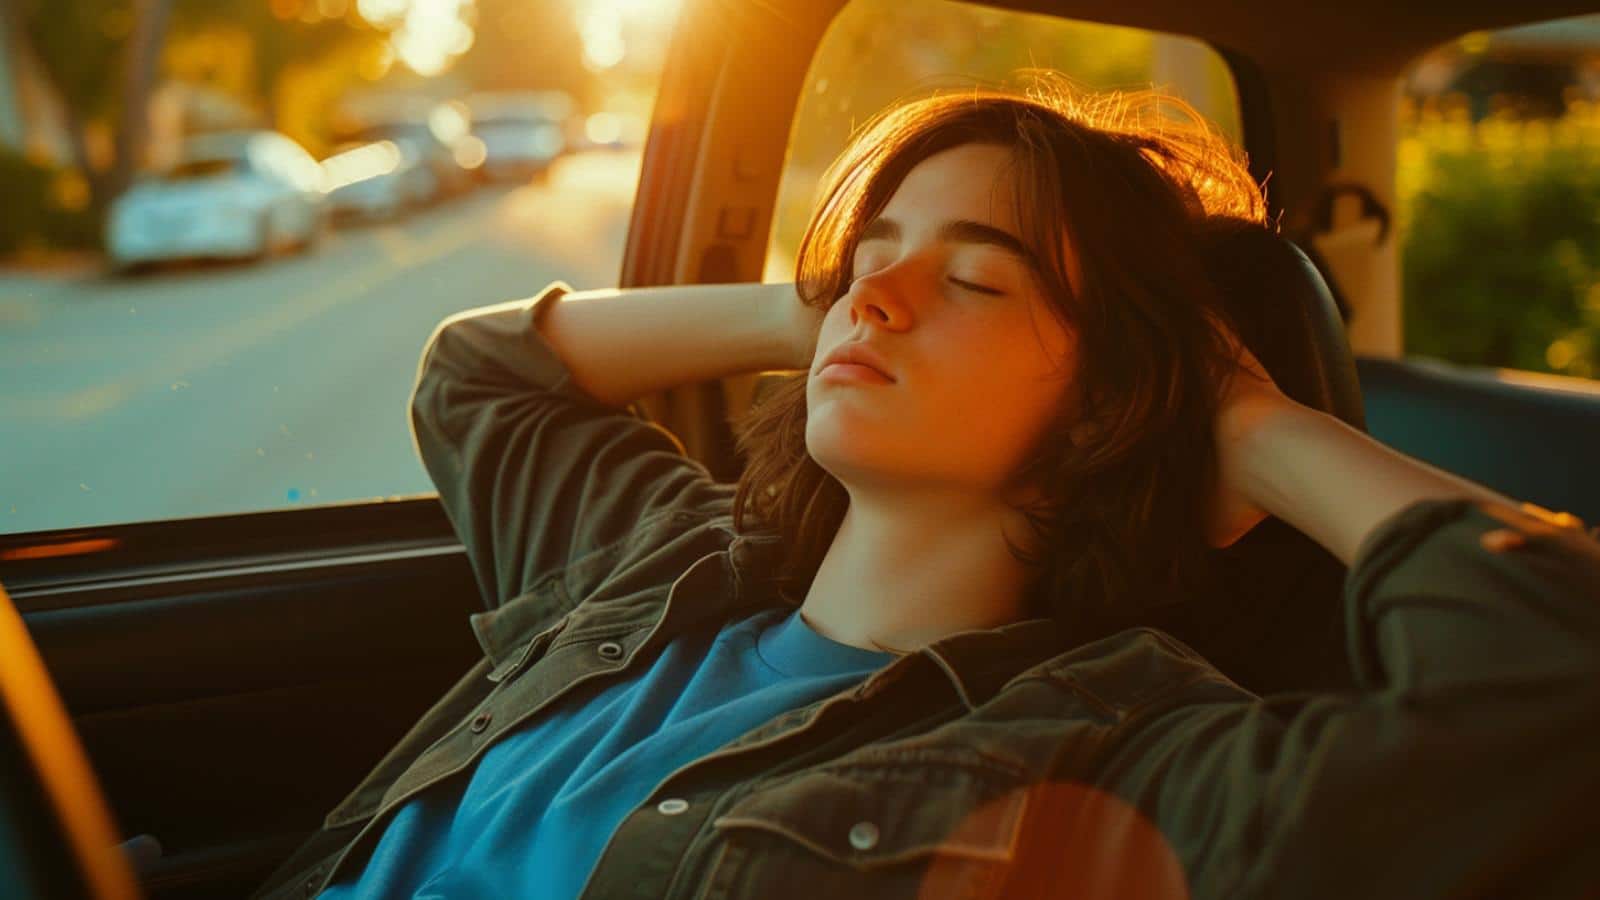 A young woman is sitting in a car with her head resting on her head.